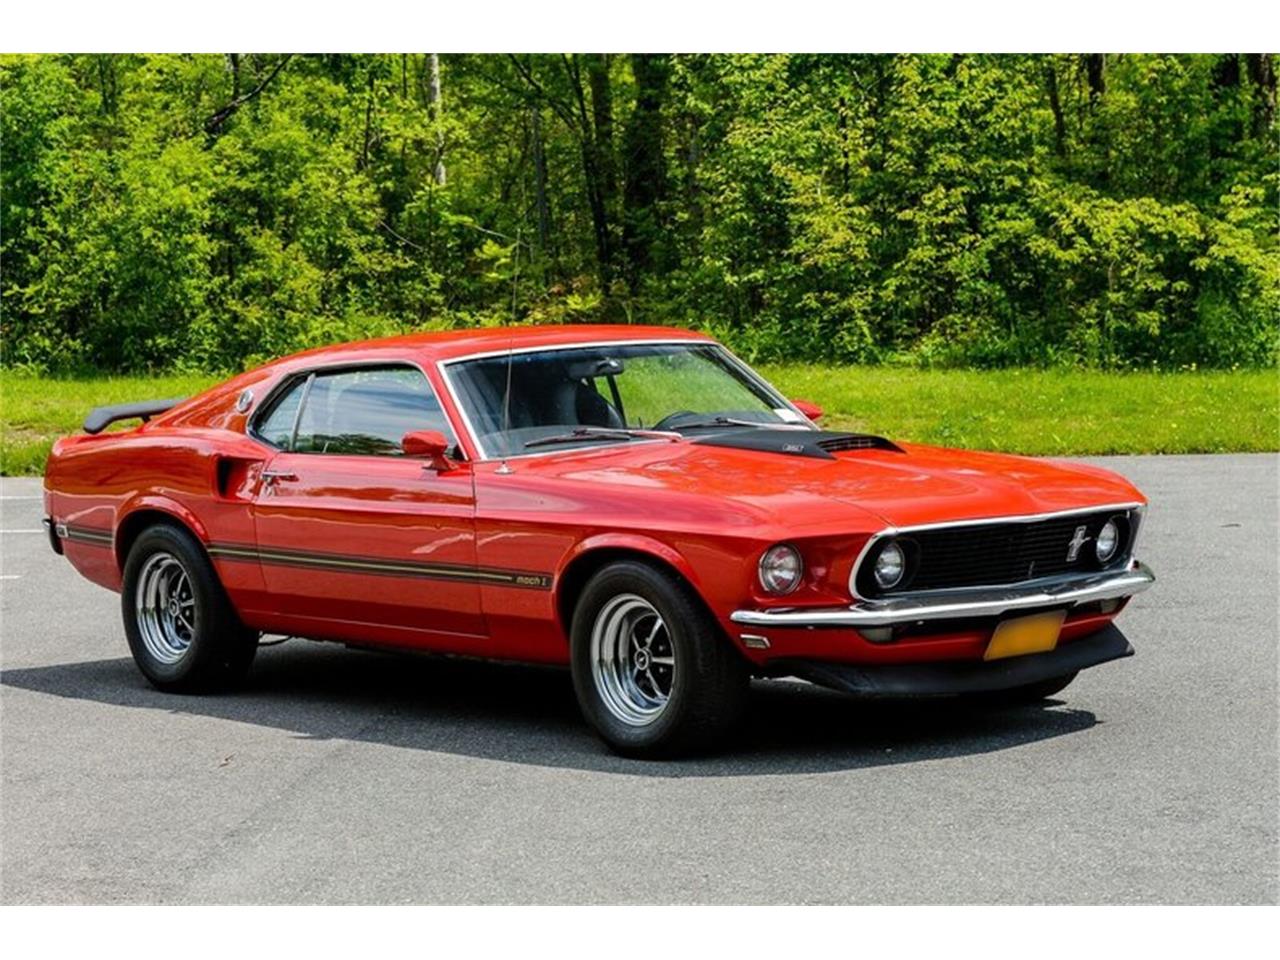 1969 Ford Mustang MACH 1 Fastback for Sale | ClassicCars.com | CC-1020725